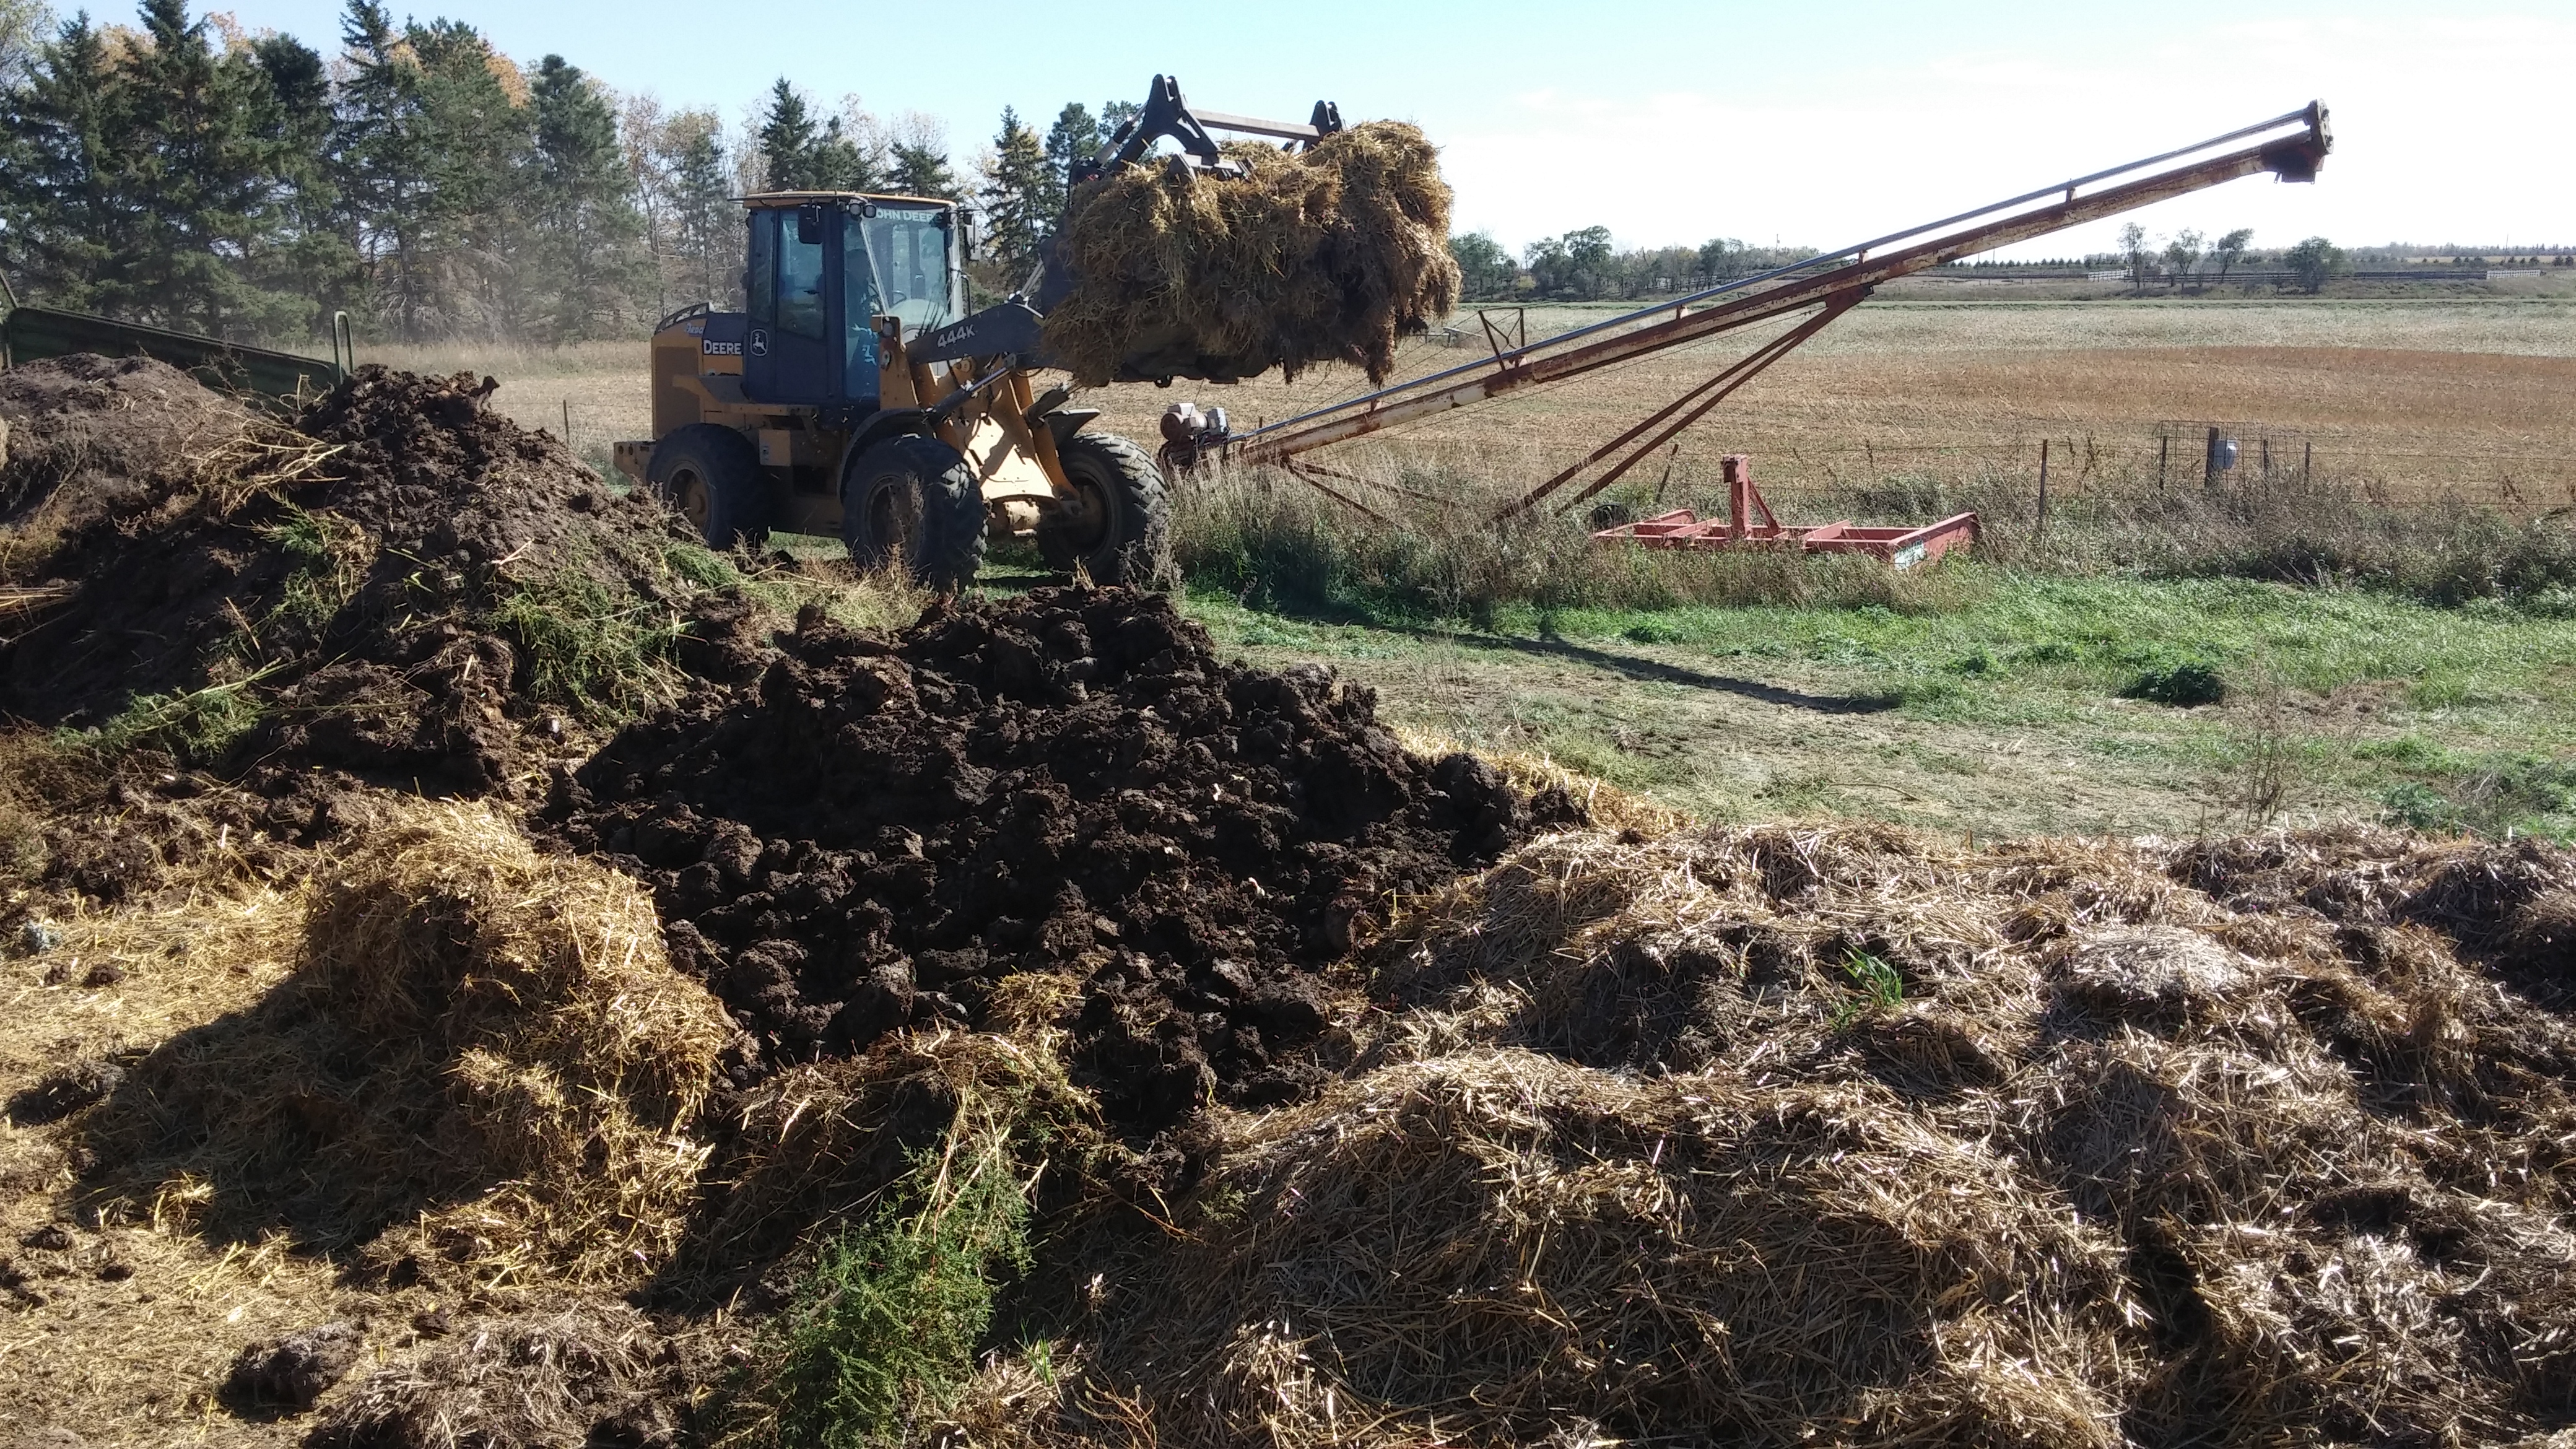 Adding cover material such as straw or old hay is the last step in creating a compost pile or windrow for disposing of dead livestock. (NDSU photo)